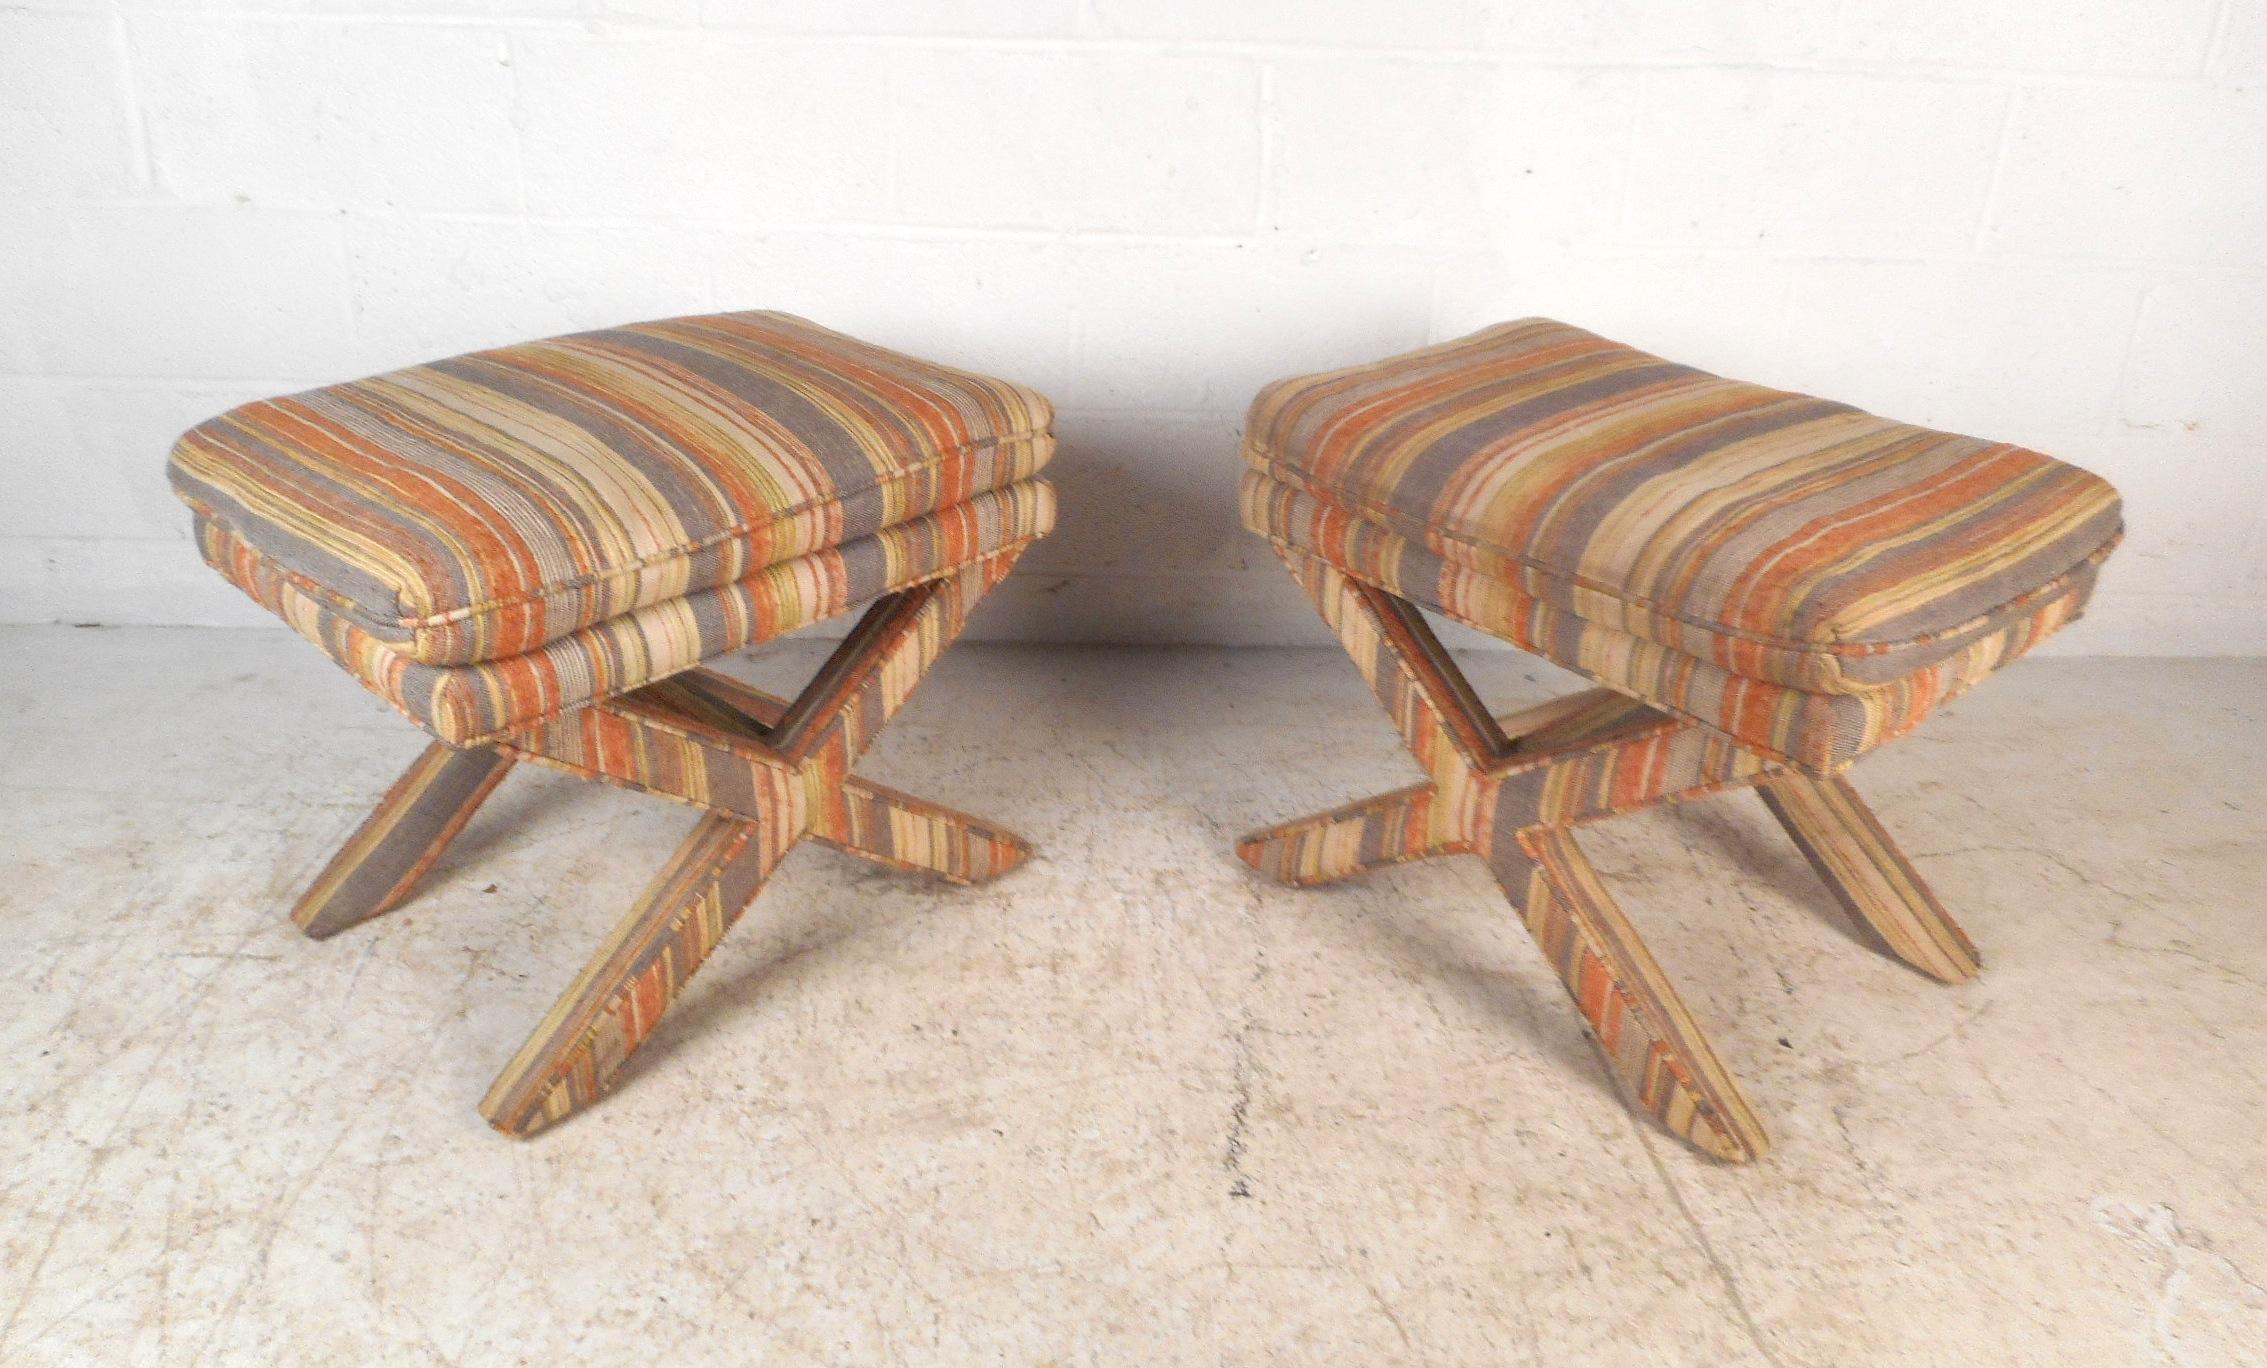 These unique midcentury ottomans feature plush padded rests atop an eye-catching cross-base frame. A striped vintage upholstery covers both the base and seat, providing a stylish continuity throughout the design. Please confirm item location (NY or